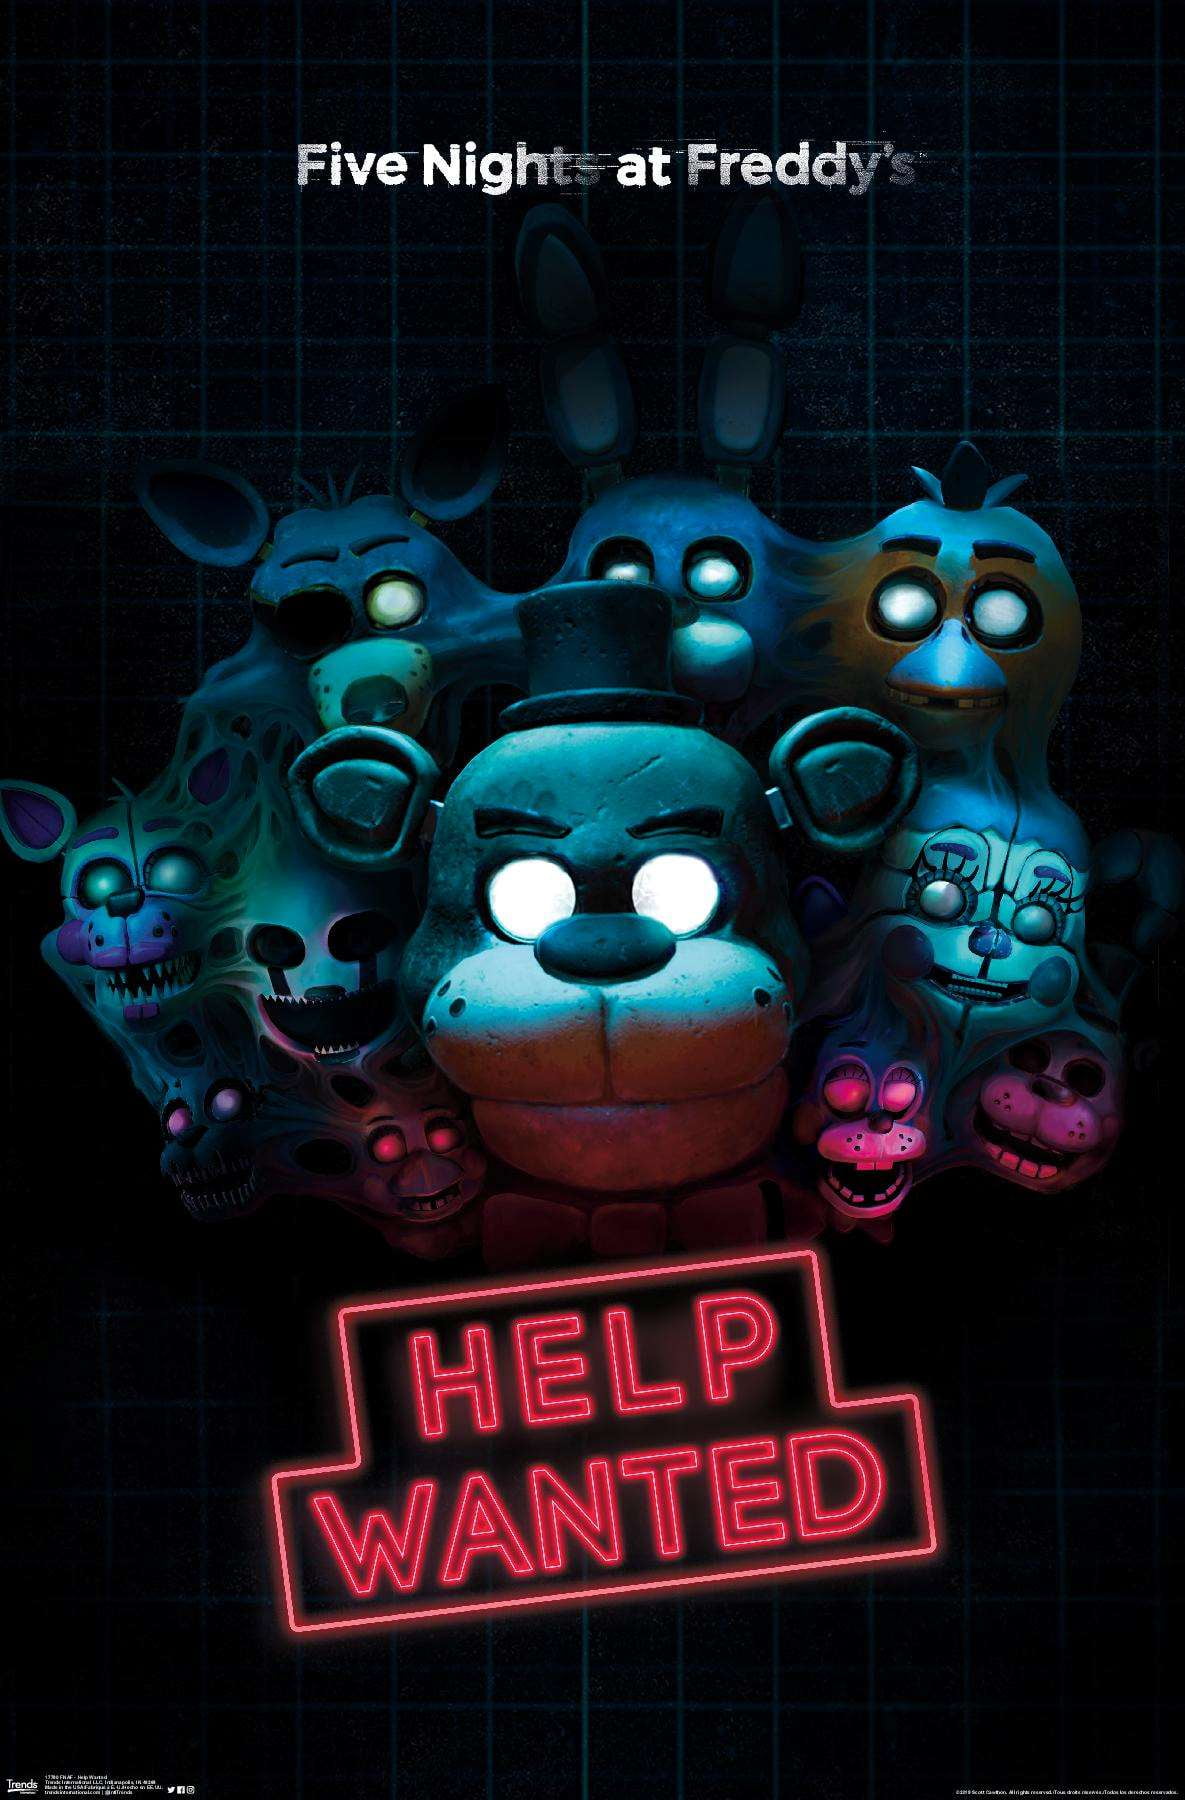 FIVE NIGHTS AT FREDDY'S  COLOURFUL  POSTER  VINYL WALL STICKER VARIOUS SIZES